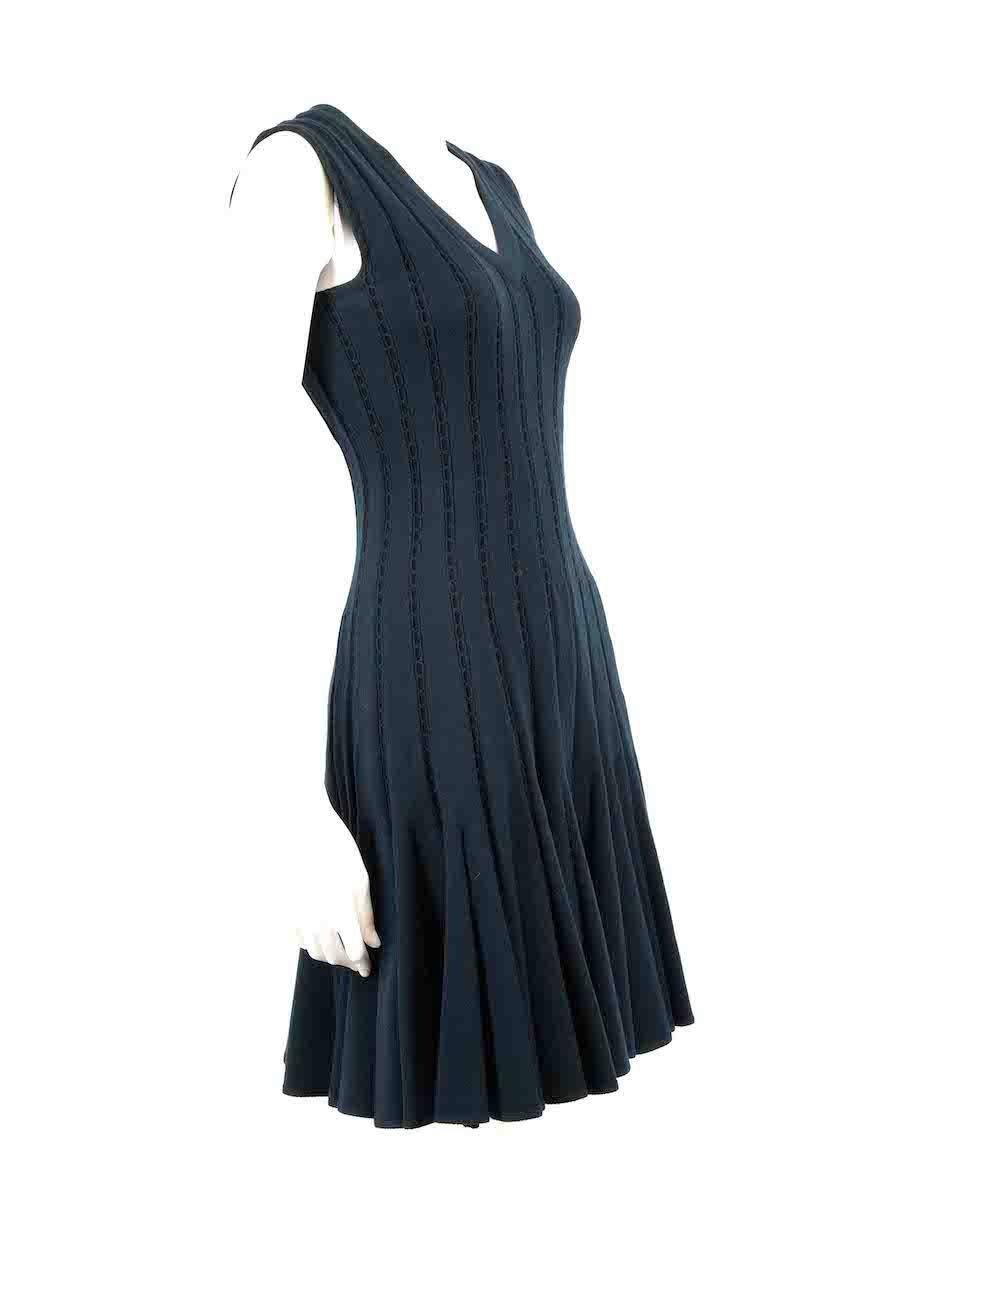 CONDITION is Very good. Hardly any visible wear to dress is evident on this used Alaïa designer resale item.
 
 
 
 Details
 
 
 Navy
 
 Wool
 
 Knitted dress
 
 Knee length
 
 Stretchy
 
 Sleeveless
 
 V neckline
 
 Flared skirt
 
 Back zip